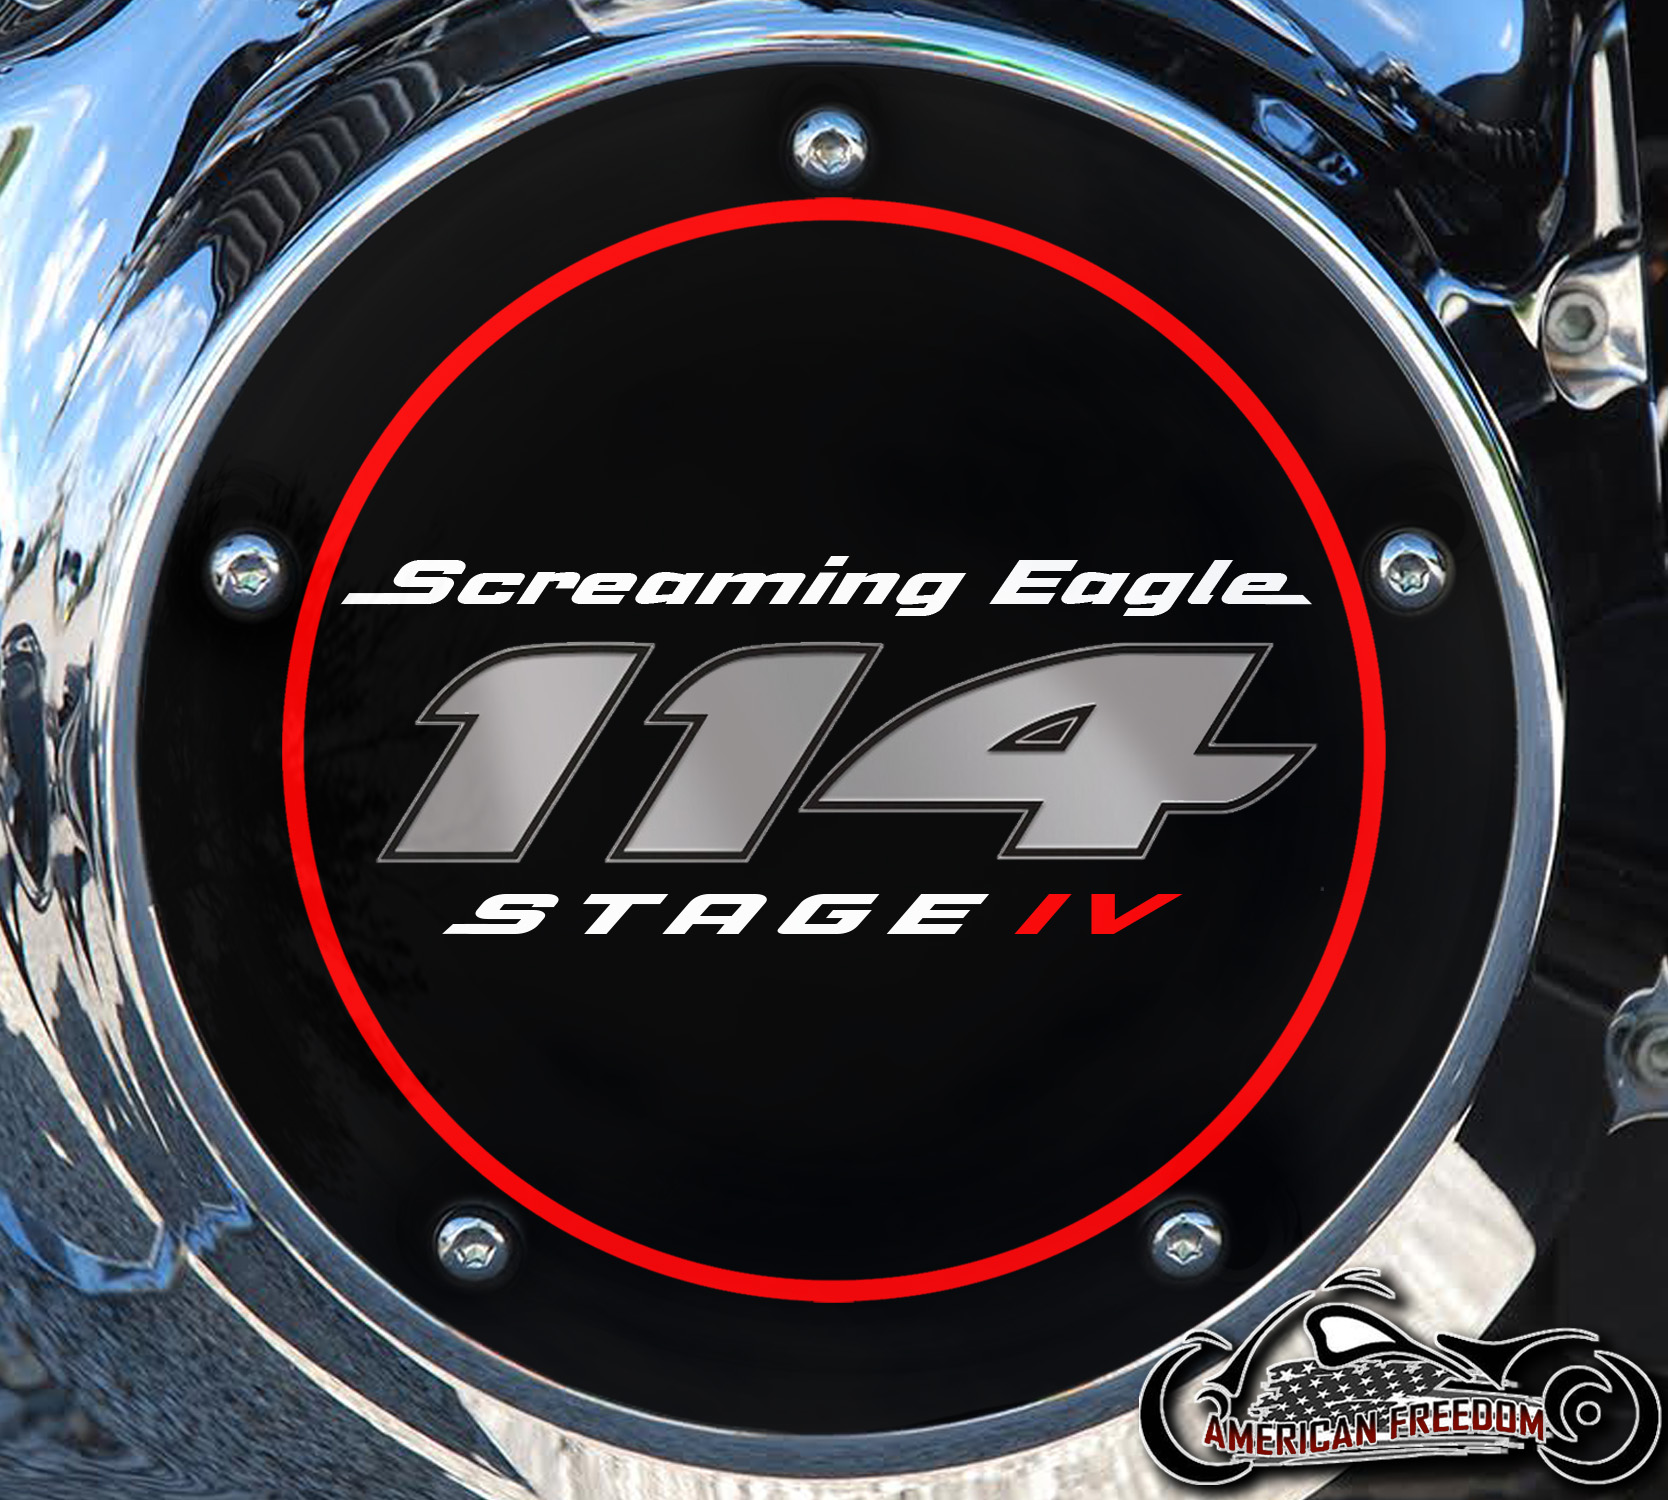 Screaming Eagle Stage IV 114 DERBY COVER OL